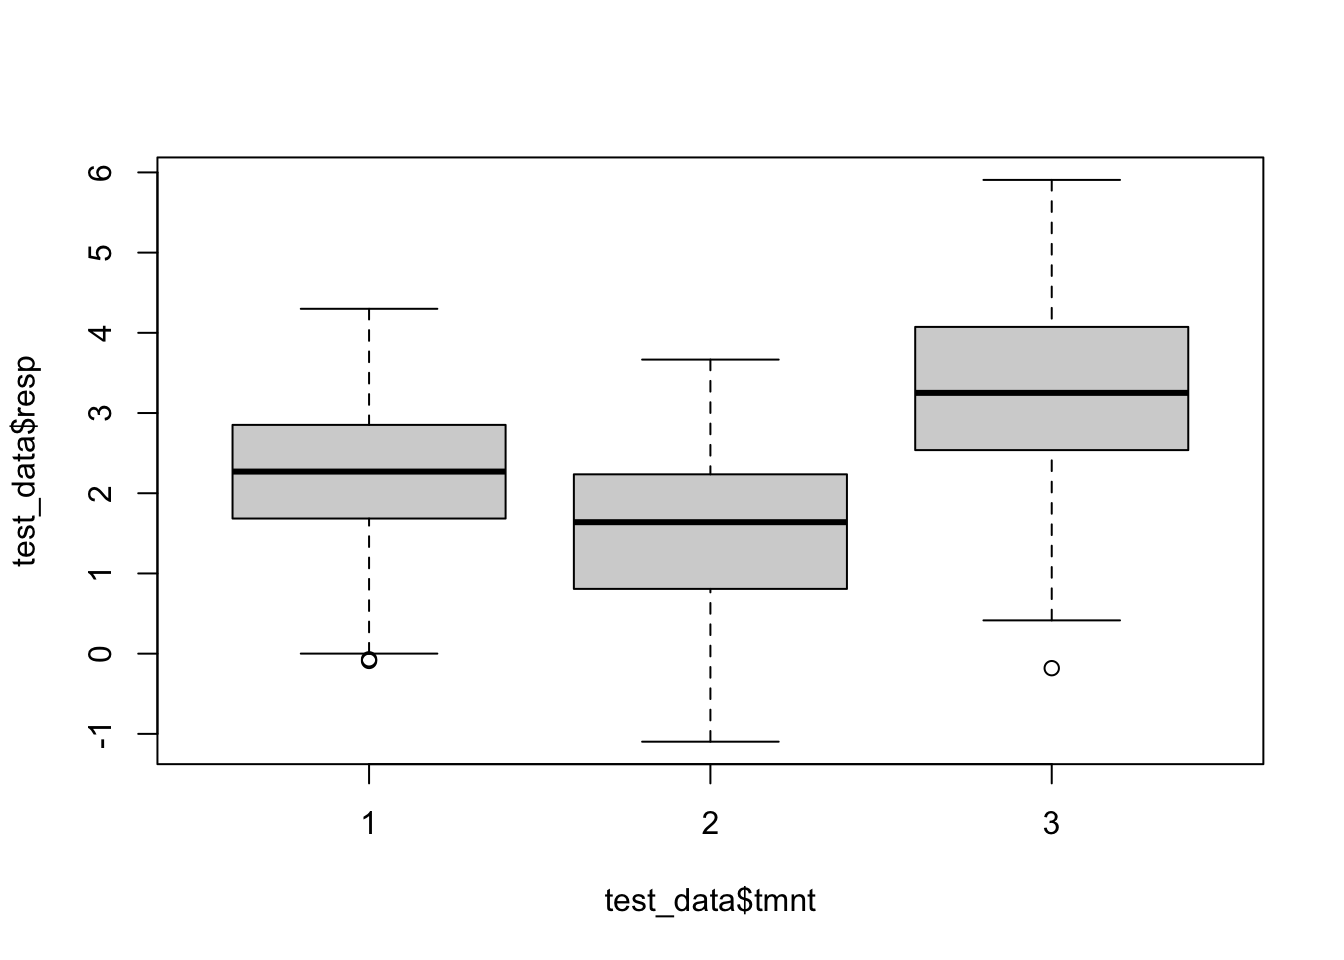 Boxplots of simulated responses from three different groups.